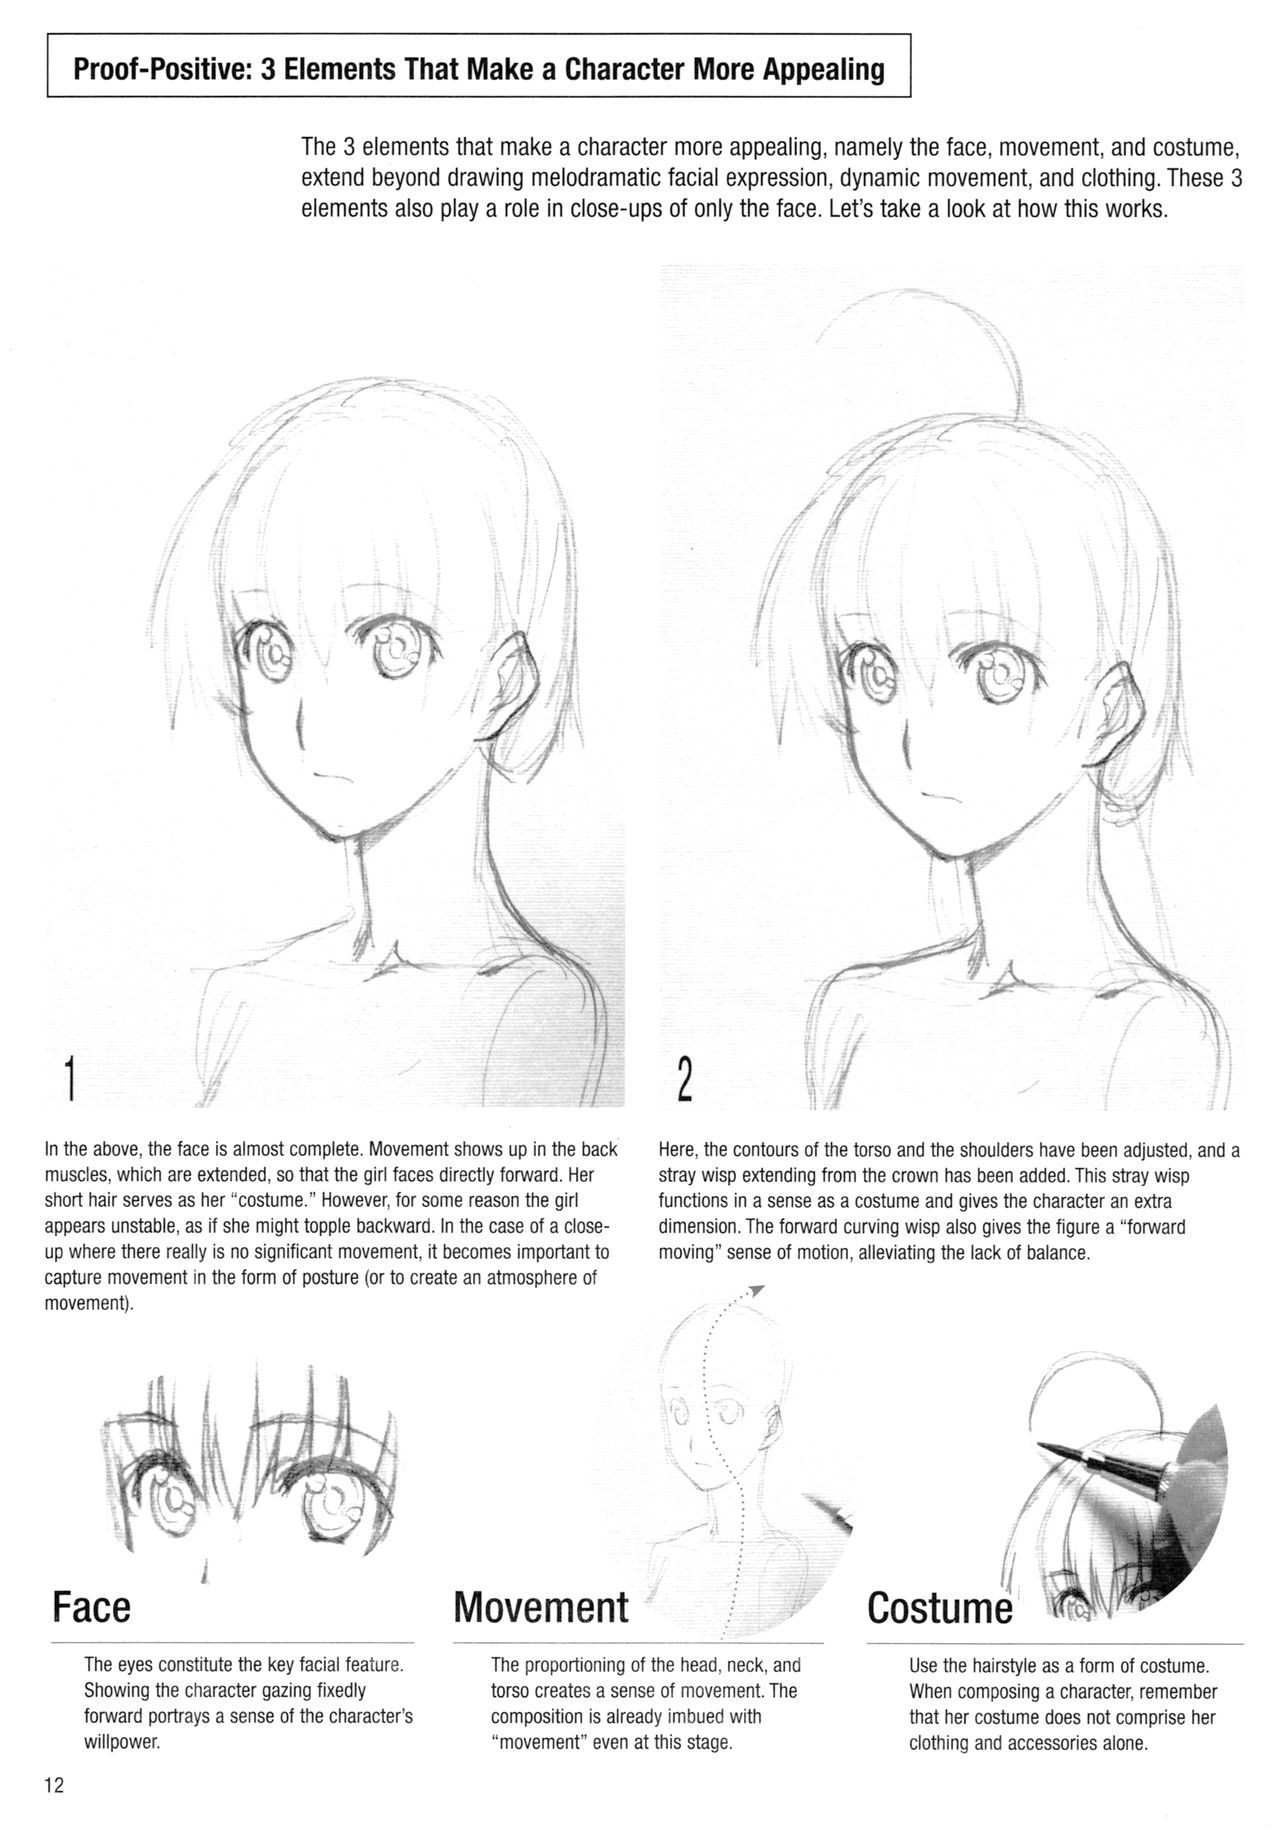 Sketching Manga-Style Vol. 3 - Unforgettable Characters 11